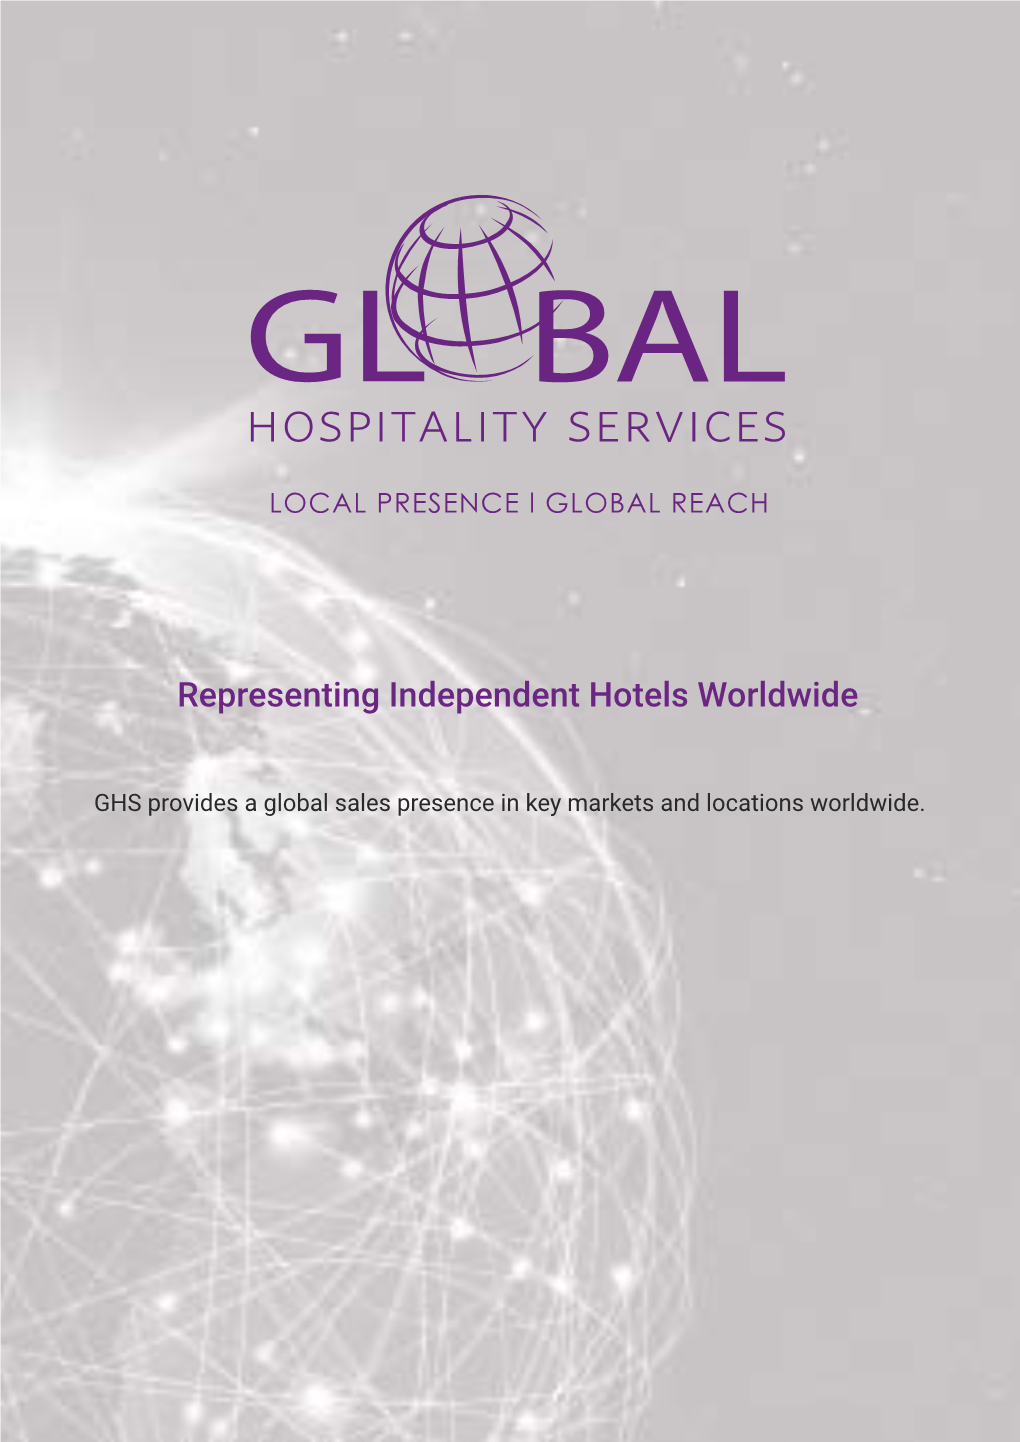 Representing Independent Hotels Worldwide